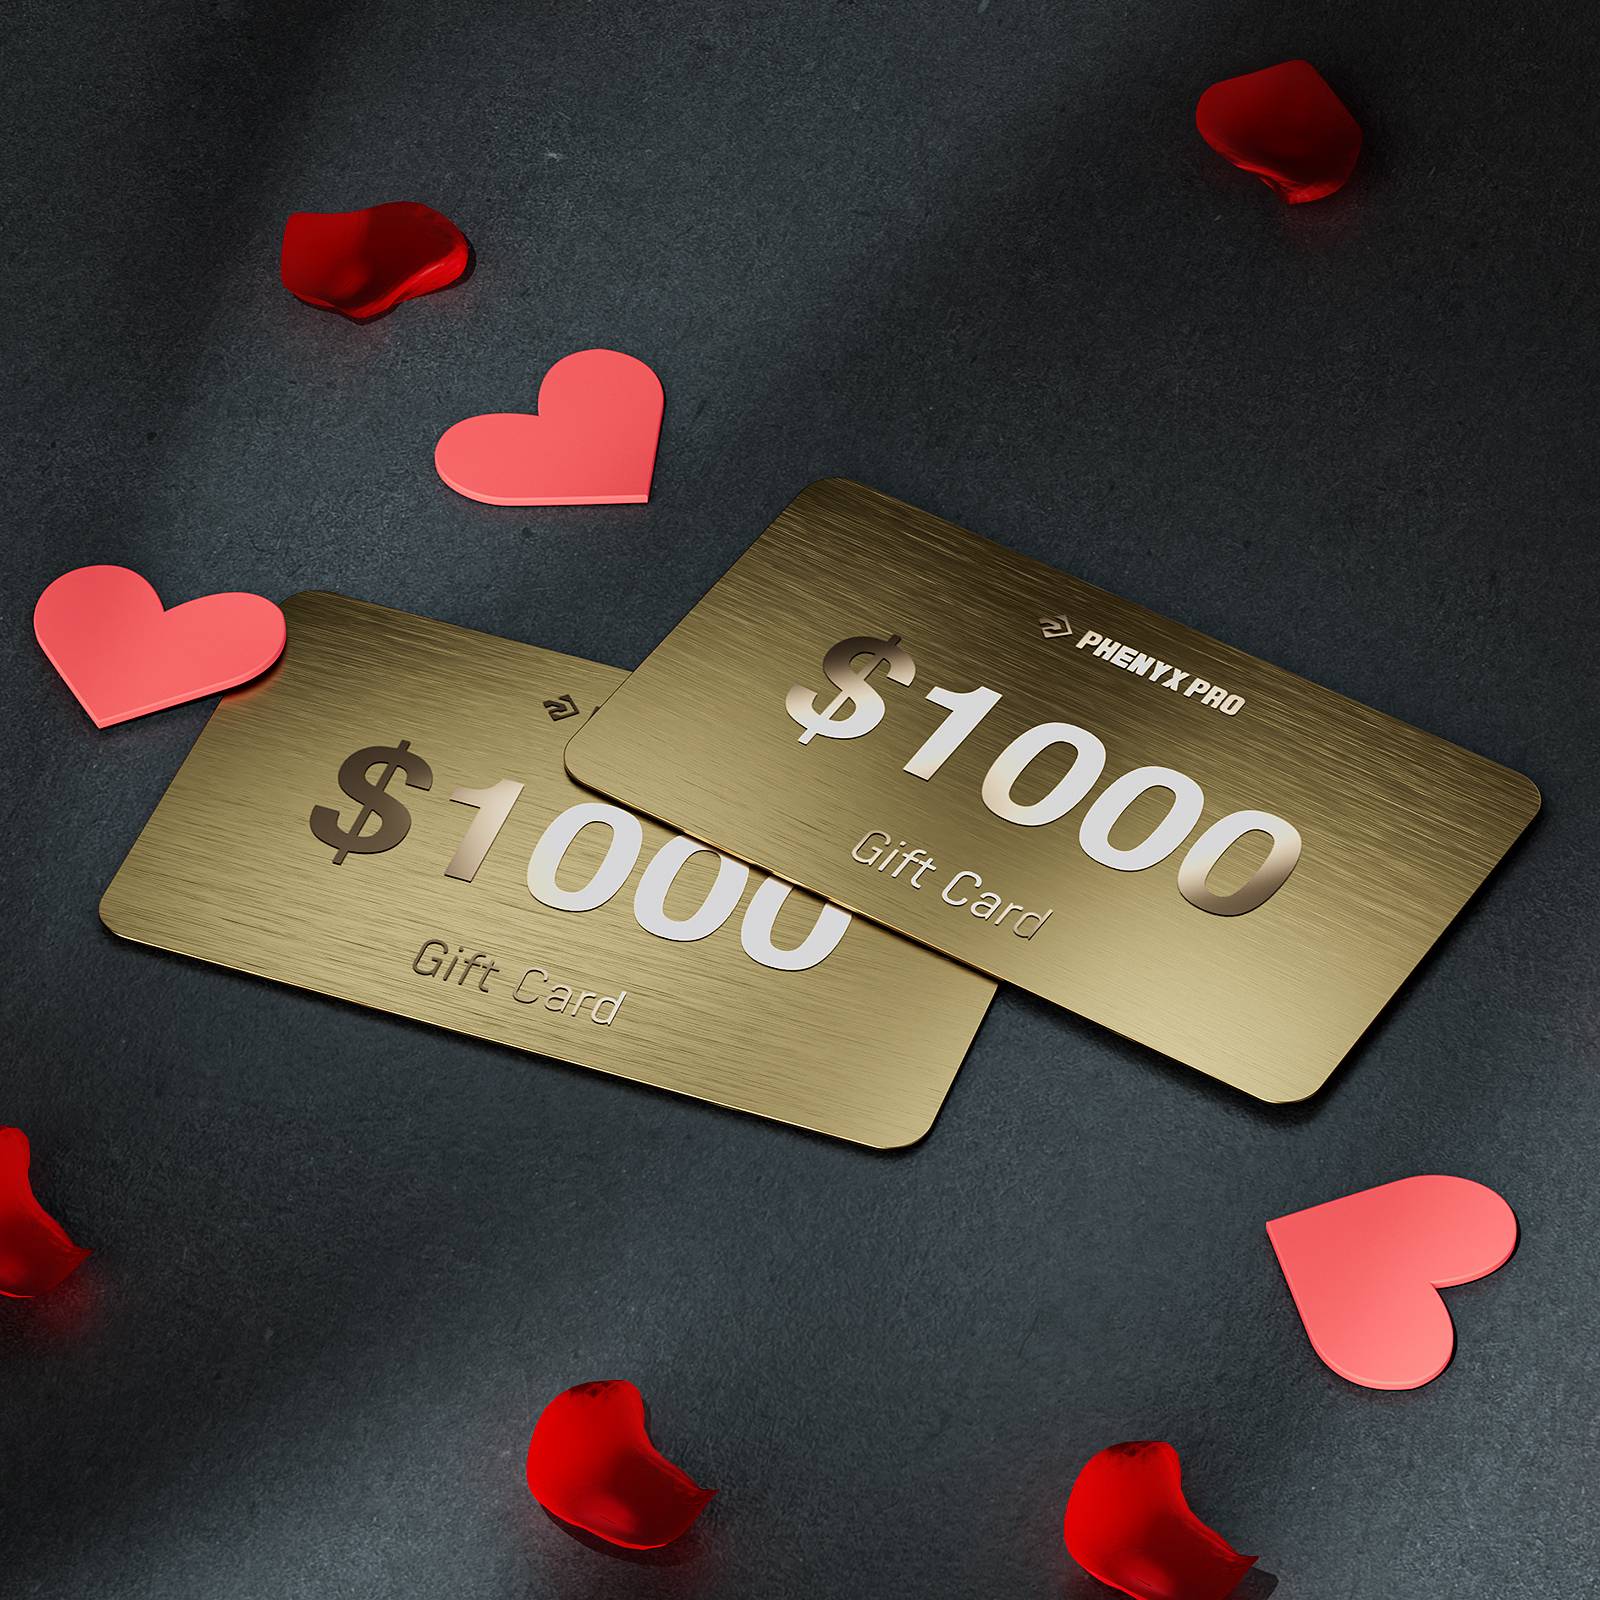 Valentine's Day Limited Edition Gift Card